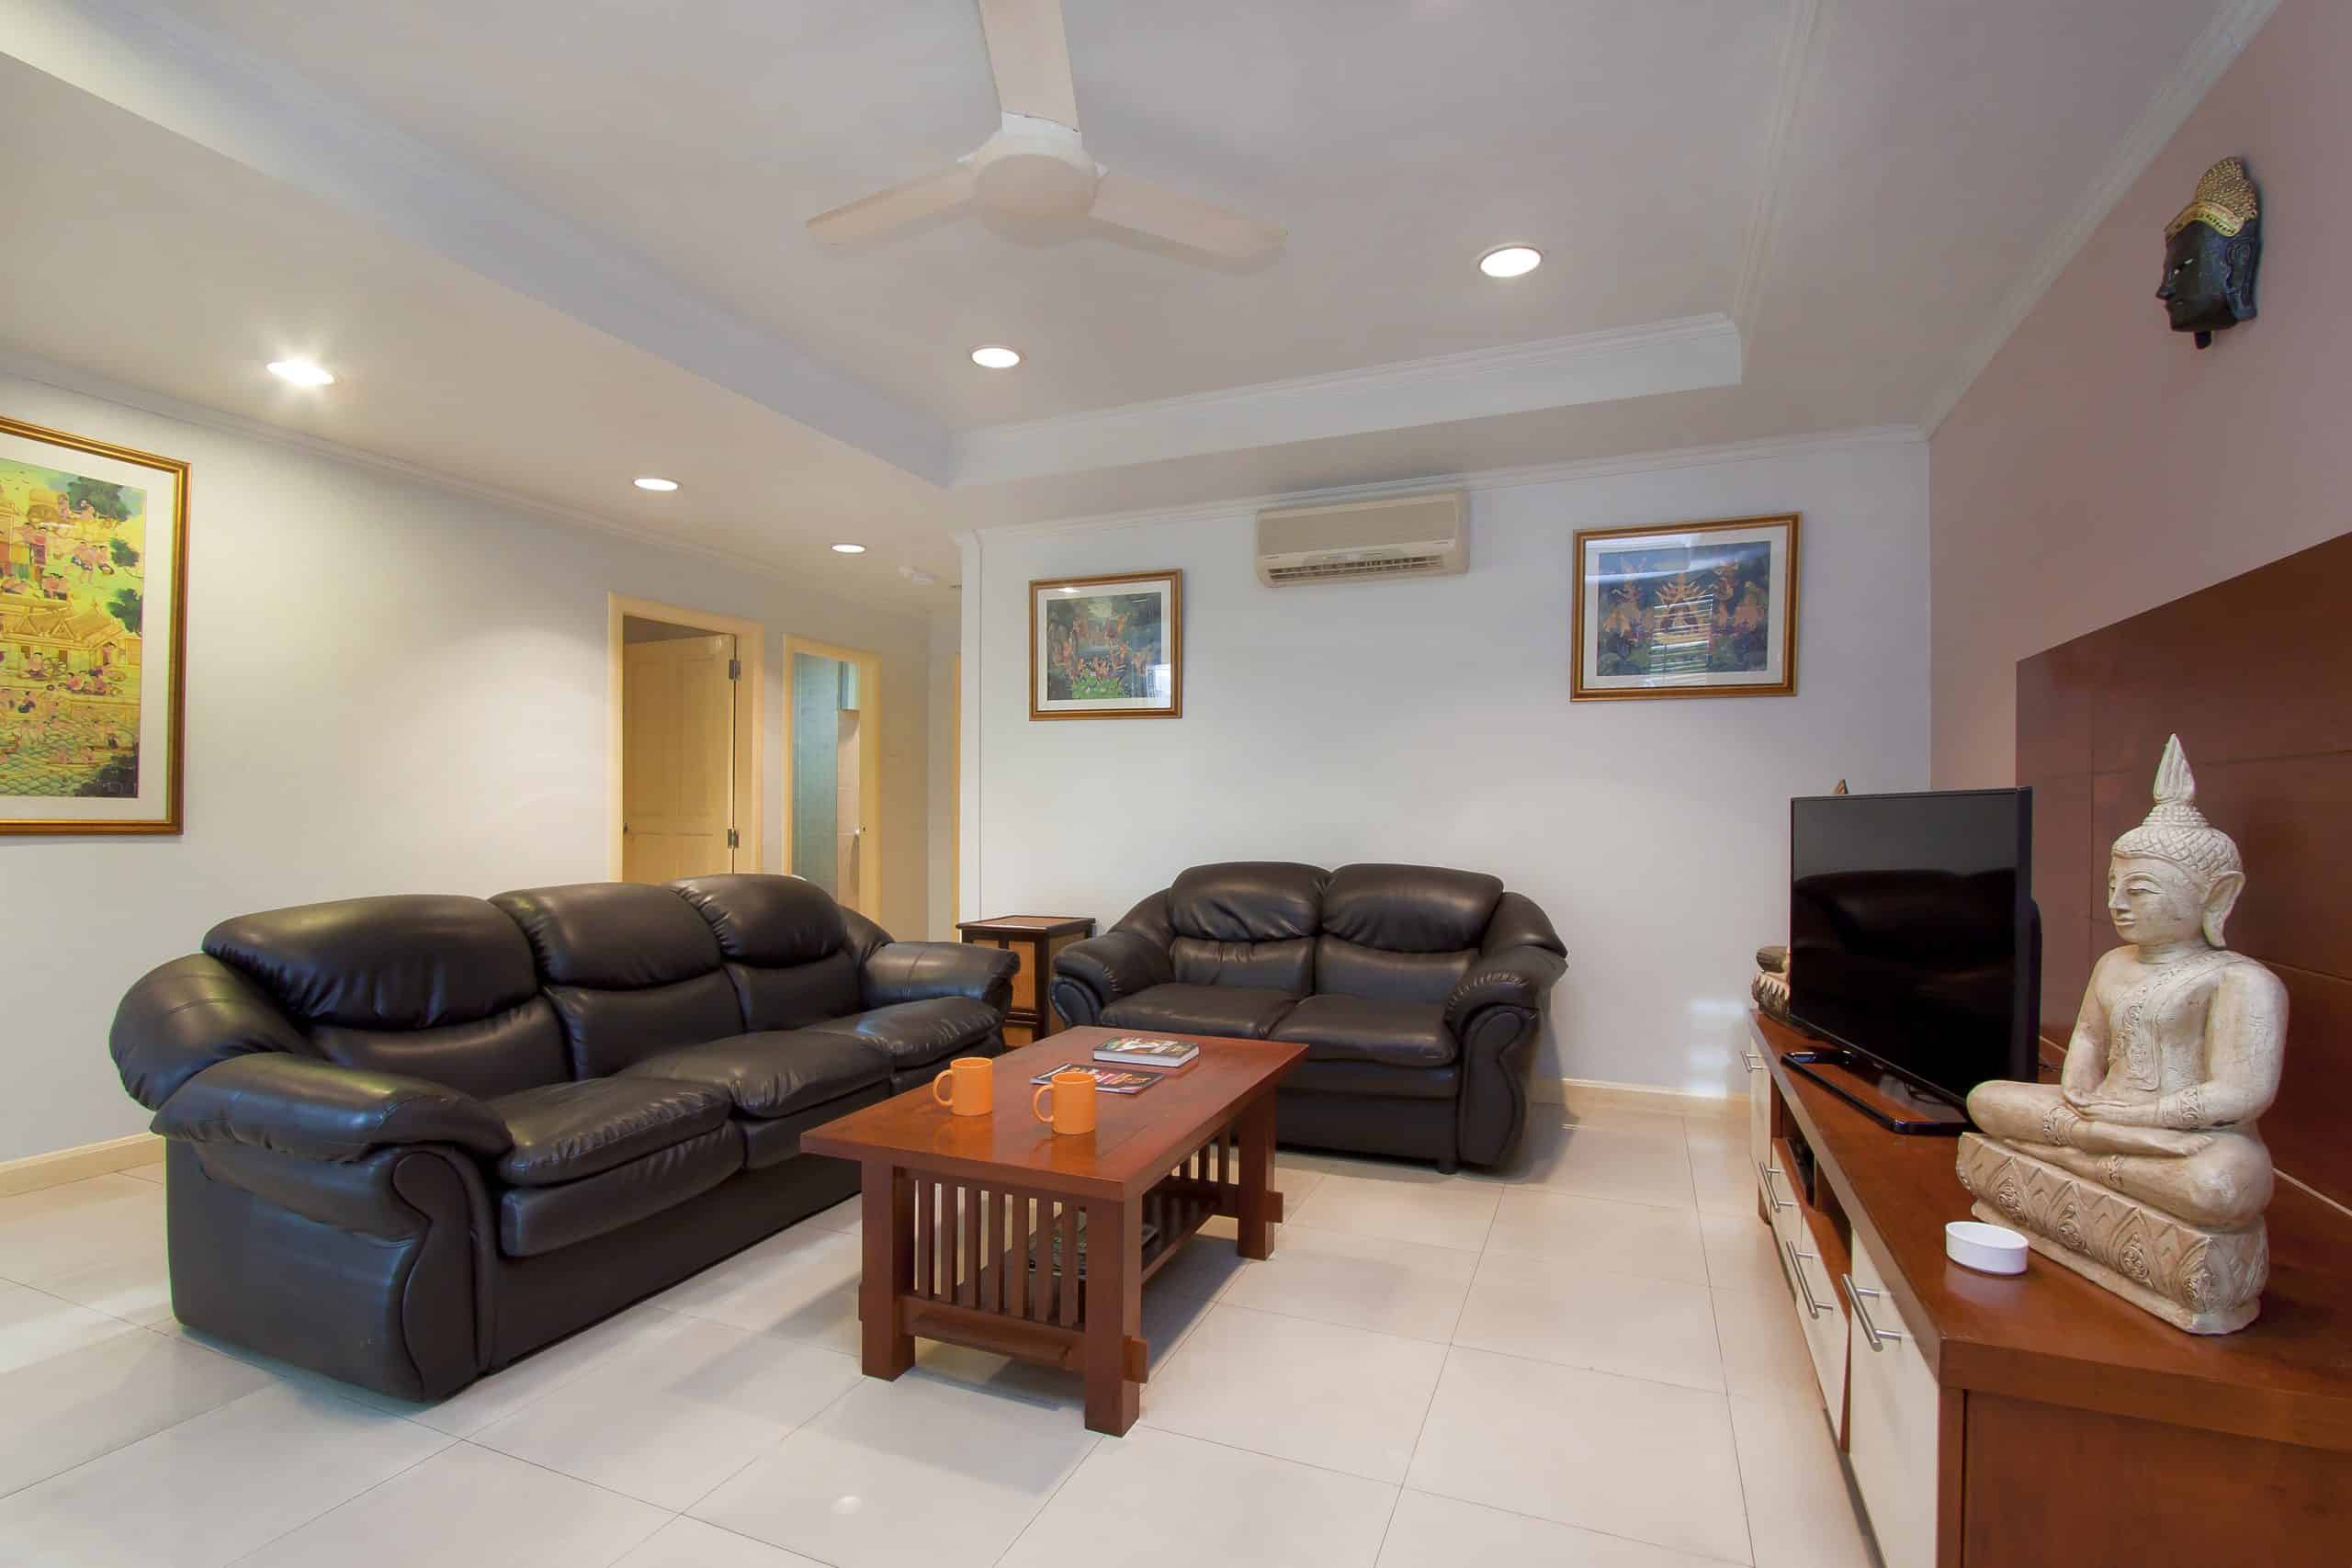 Savor a comfortable and cozy stay in our charming small studio apartment in Pattaya, featuring a stylish unit with a bed, kitchenette, private shower, air conditioning, and Wi-Fi for your comfort